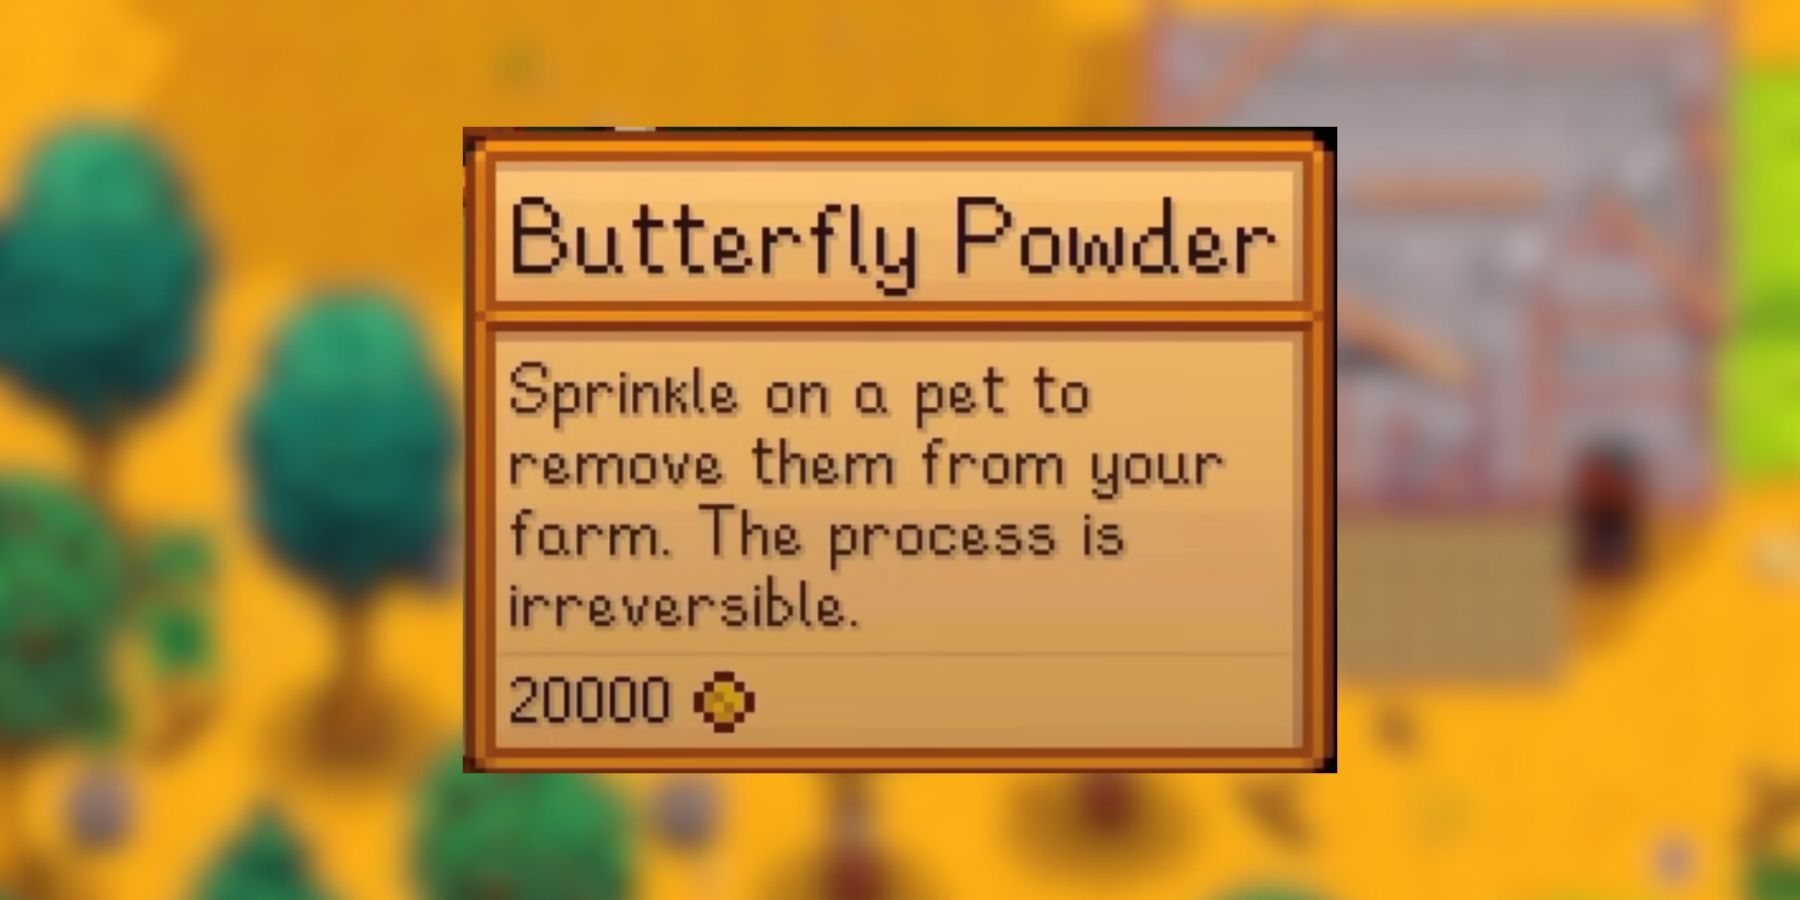 how to use the butterfly powder in stardew valley.